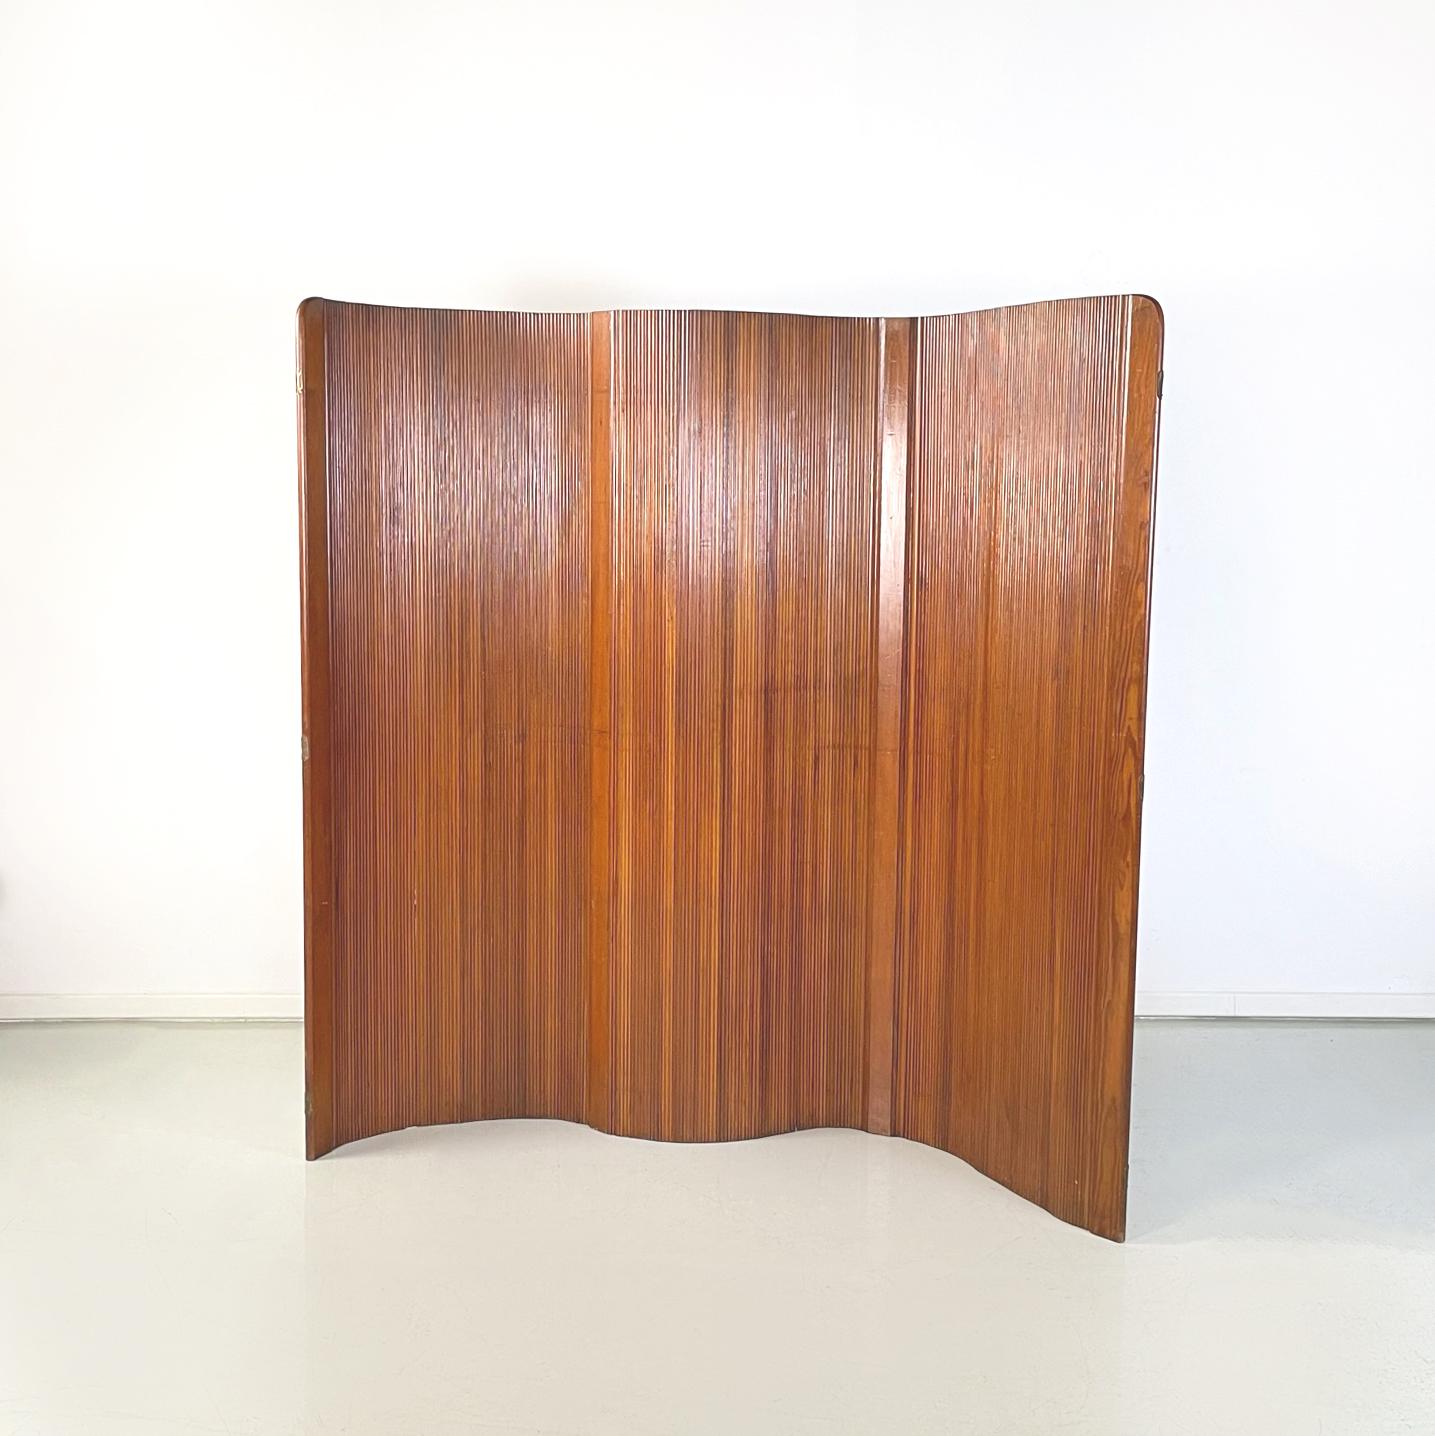 French midcentury Art Deco Self-supporting wooden screen by Baumann, 1950s
Self-supporting screen made up of vertical wooden strips of different shades. This structure allows the screen to be fully articulated, therefore to be positioned as